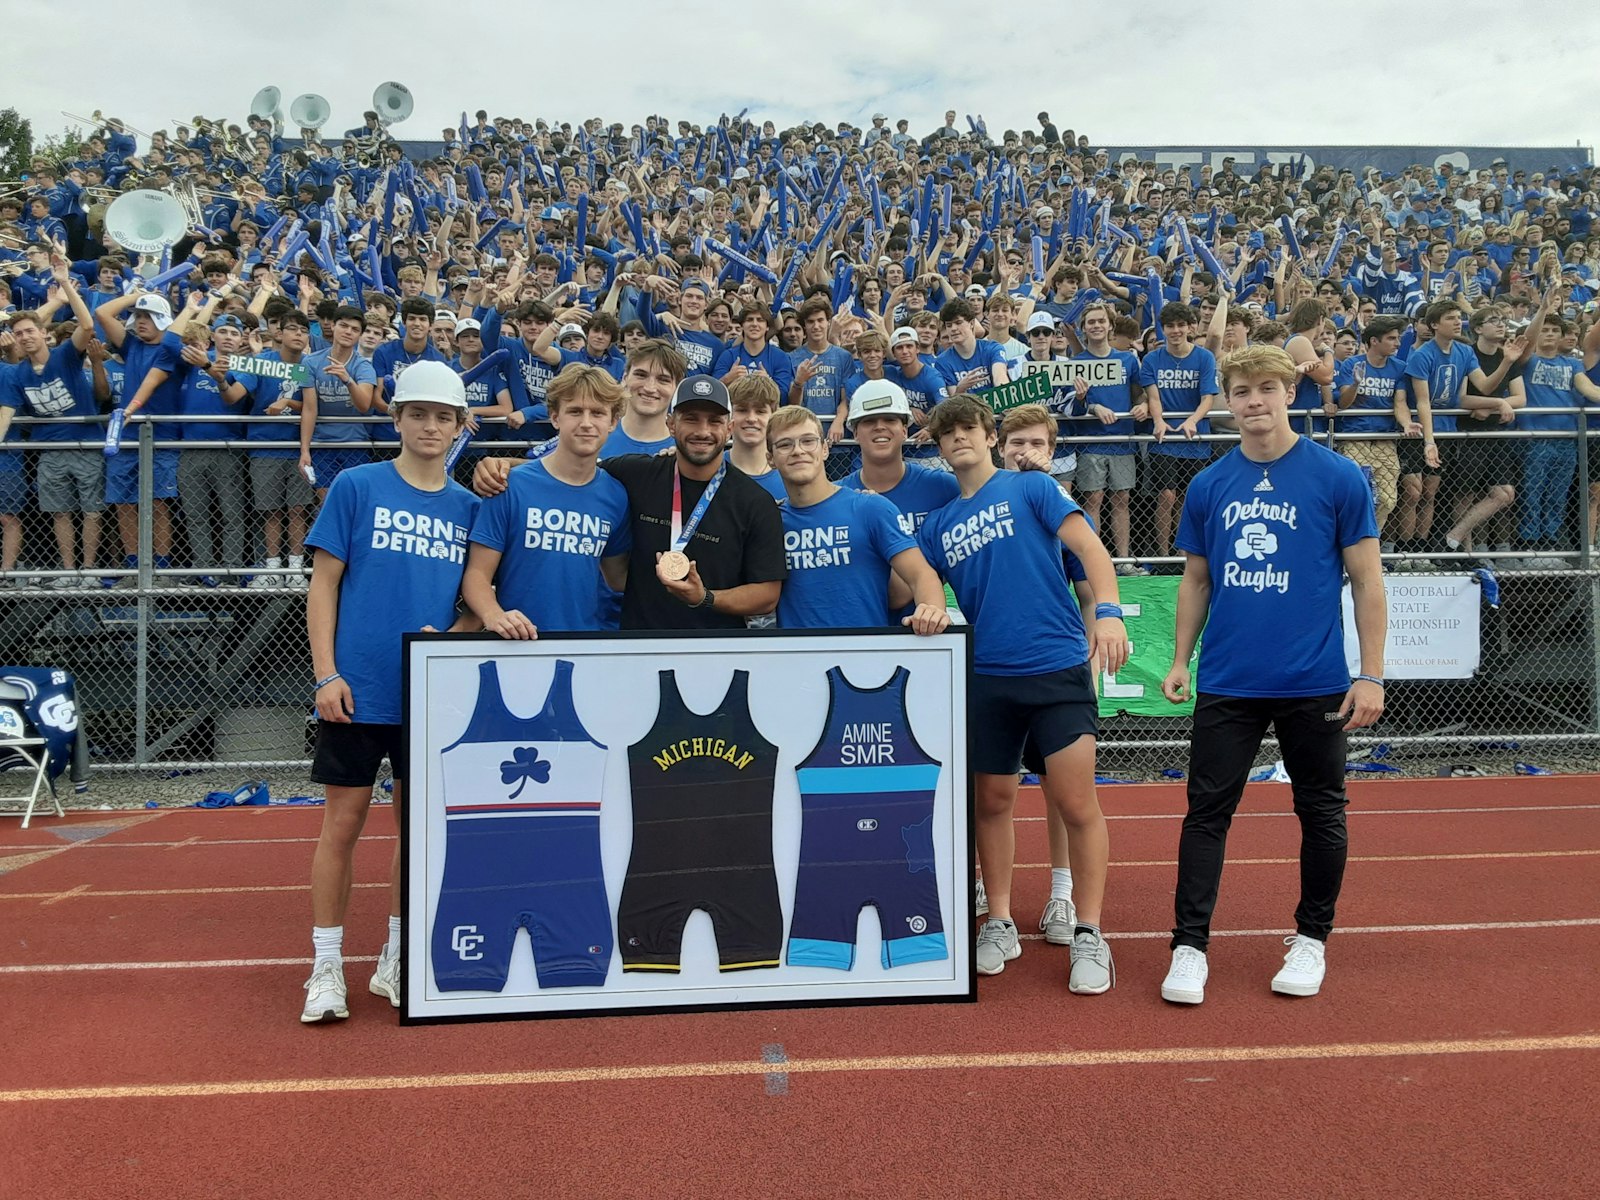 Amine said there were more people at the Catholic Central Boys’ Bowl this fall than watching the summer games in person, with spectator restrictions necessary due to the spread of the COVID-19 virus. (Photo by Wright Wilson | Special to Detroit Catholic)